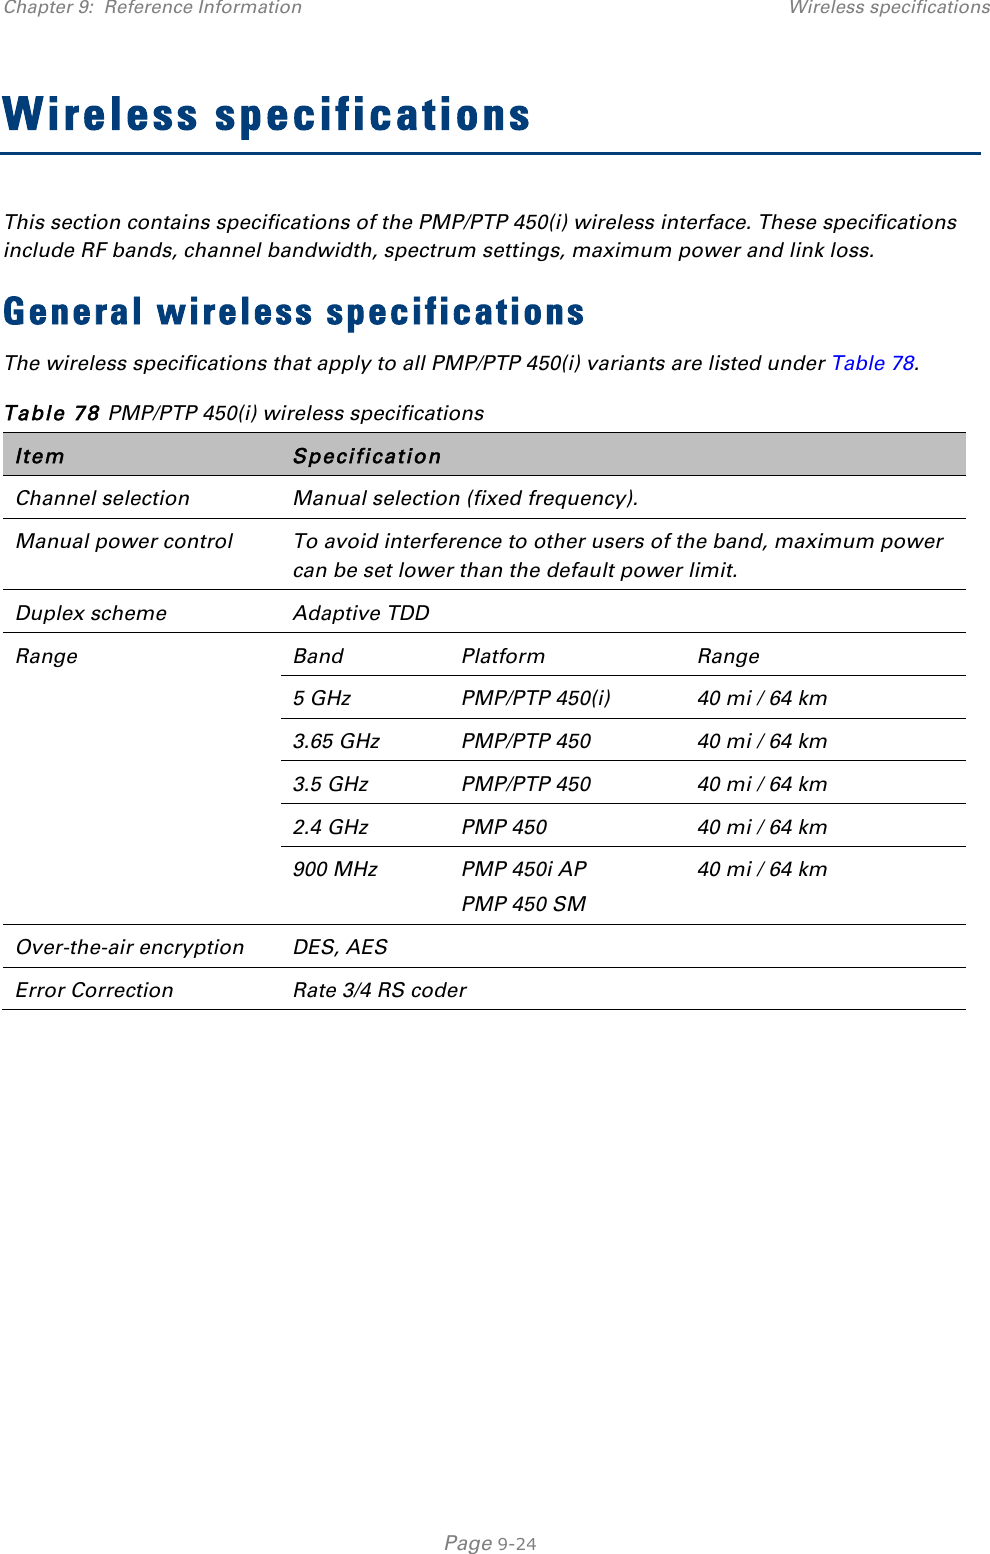 Chapter 9:  Reference Information Wireless specifications   Page 9-24 Wireless specifications This section contains specifications of the PMP/PTP 450(i) wireless interface. These specifications include RF bands, channel bandwidth, spectrum settings, maximum power and link loss. General wireless specifications The wireless specifications that apply to all PMP/PTP 450(i) variants are listed under Table 78. Table 78 PMP/PTP 450(i) wireless specifications Item Specification Channel selection Manual selection (fixed frequency). Manual power control  To avoid interference to other users of the band, maximum power can be set lower than the default power limit. Duplex scheme Adaptive TDD Range Band Platform Range 5 GHz  PMP/PTP 450(i) 40 mi / 64 km 3.65 GHz  PMP/PTP 450 40 mi / 64 km 3.5 GHz  PMP/PTP 450 40 mi / 64 km 2.4 GHz  PMP 450 40 mi / 64 km 900 MHz  PMP 450i AP  PMP 450 SM 40 mi / 64 km Over-the-air encryption DES, AES Error Correction Rate 3/4 RS coder    